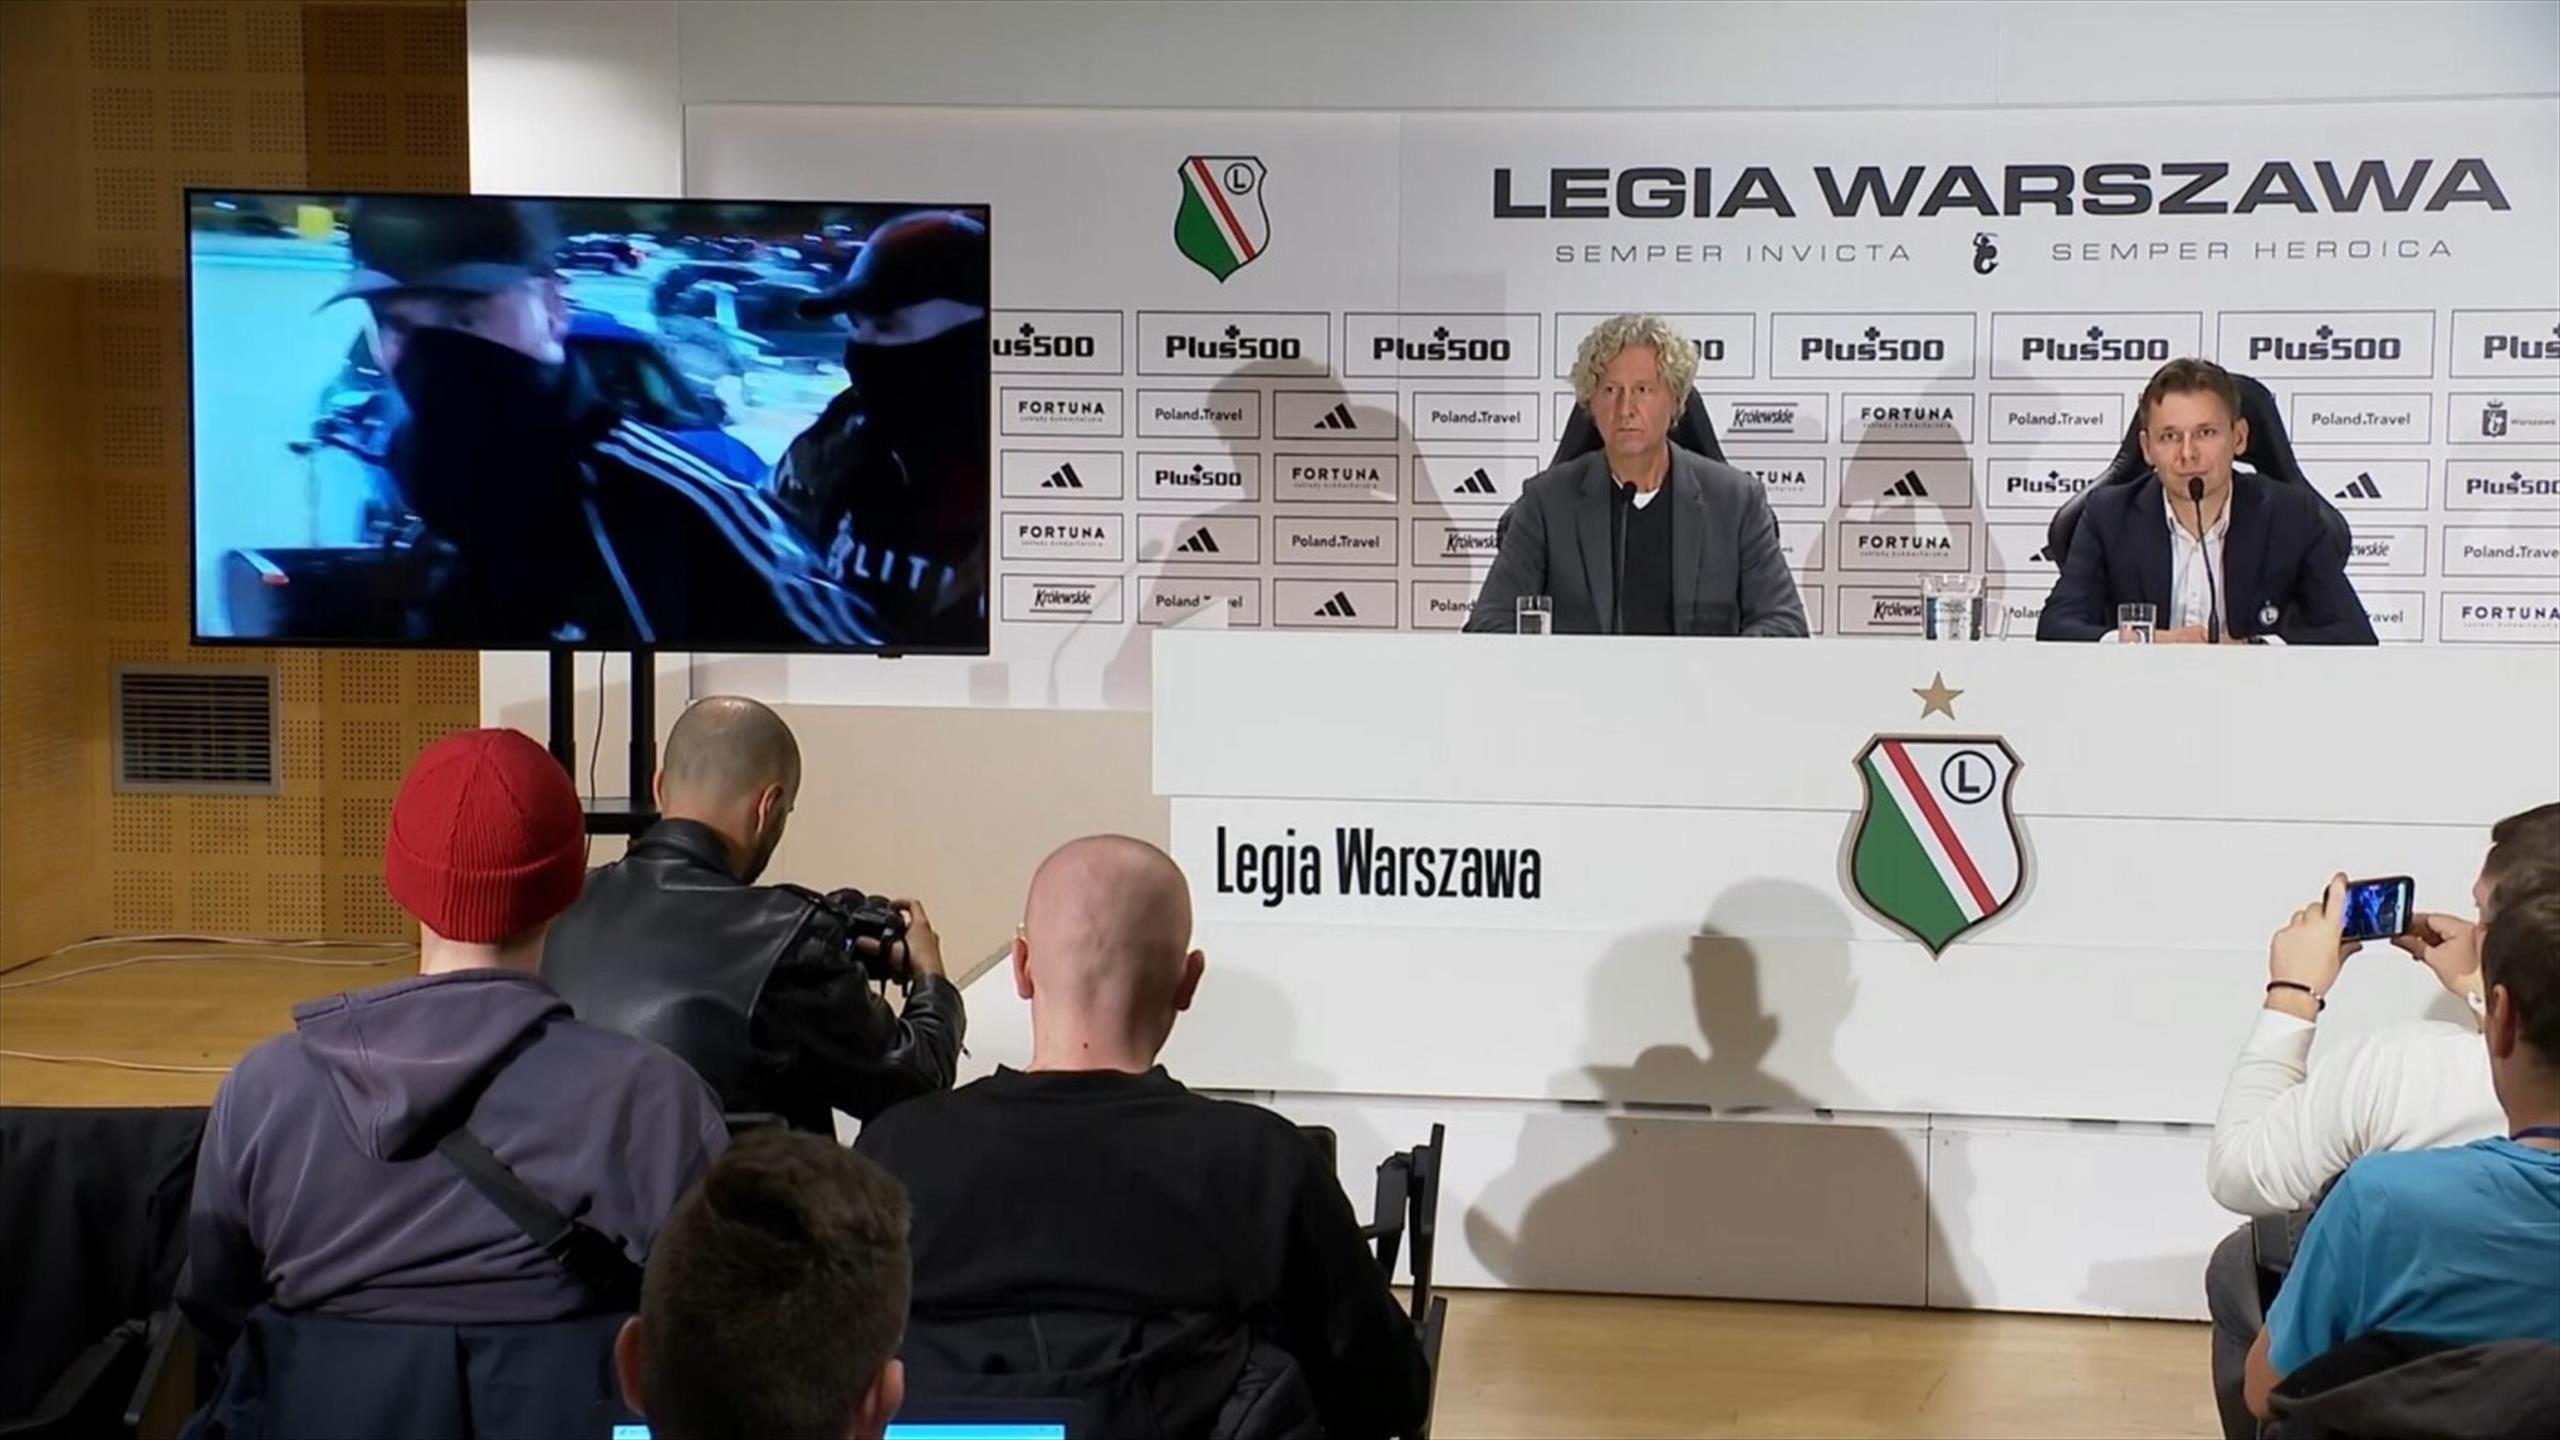 Legia Conference after the events in Holland.  “It was not an accident”